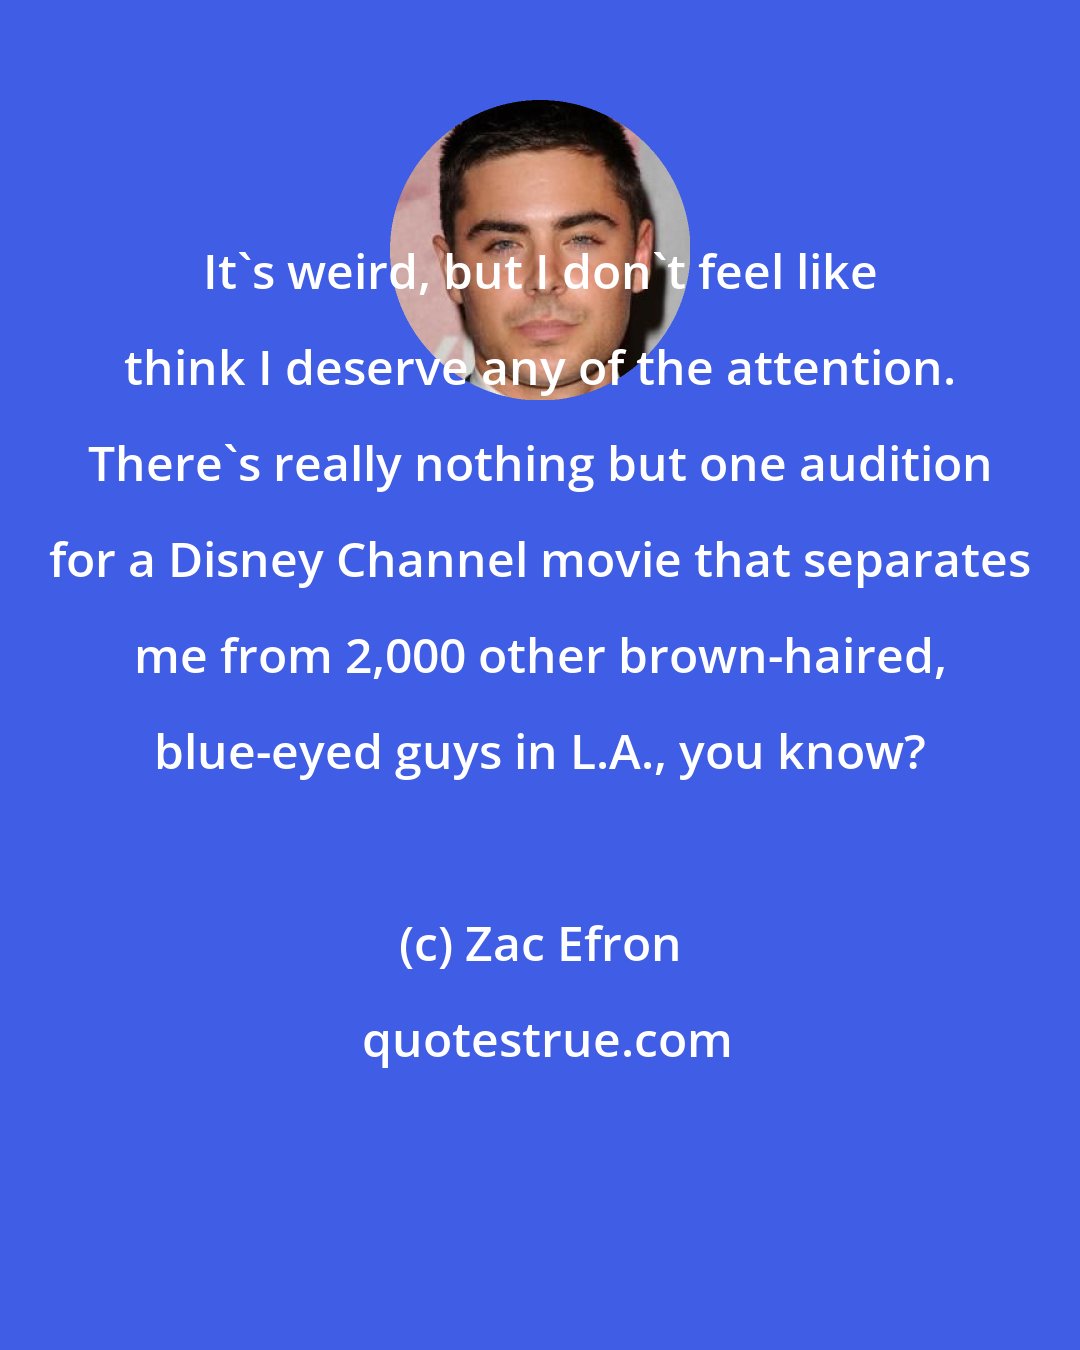 Zac Efron: It's weird, but I don't feel like think I deserve any of the attention. There's really nothing but one audition for a Disney Channel movie that separates me from 2,000 other brown-haired, blue-eyed guys in L.A., you know?